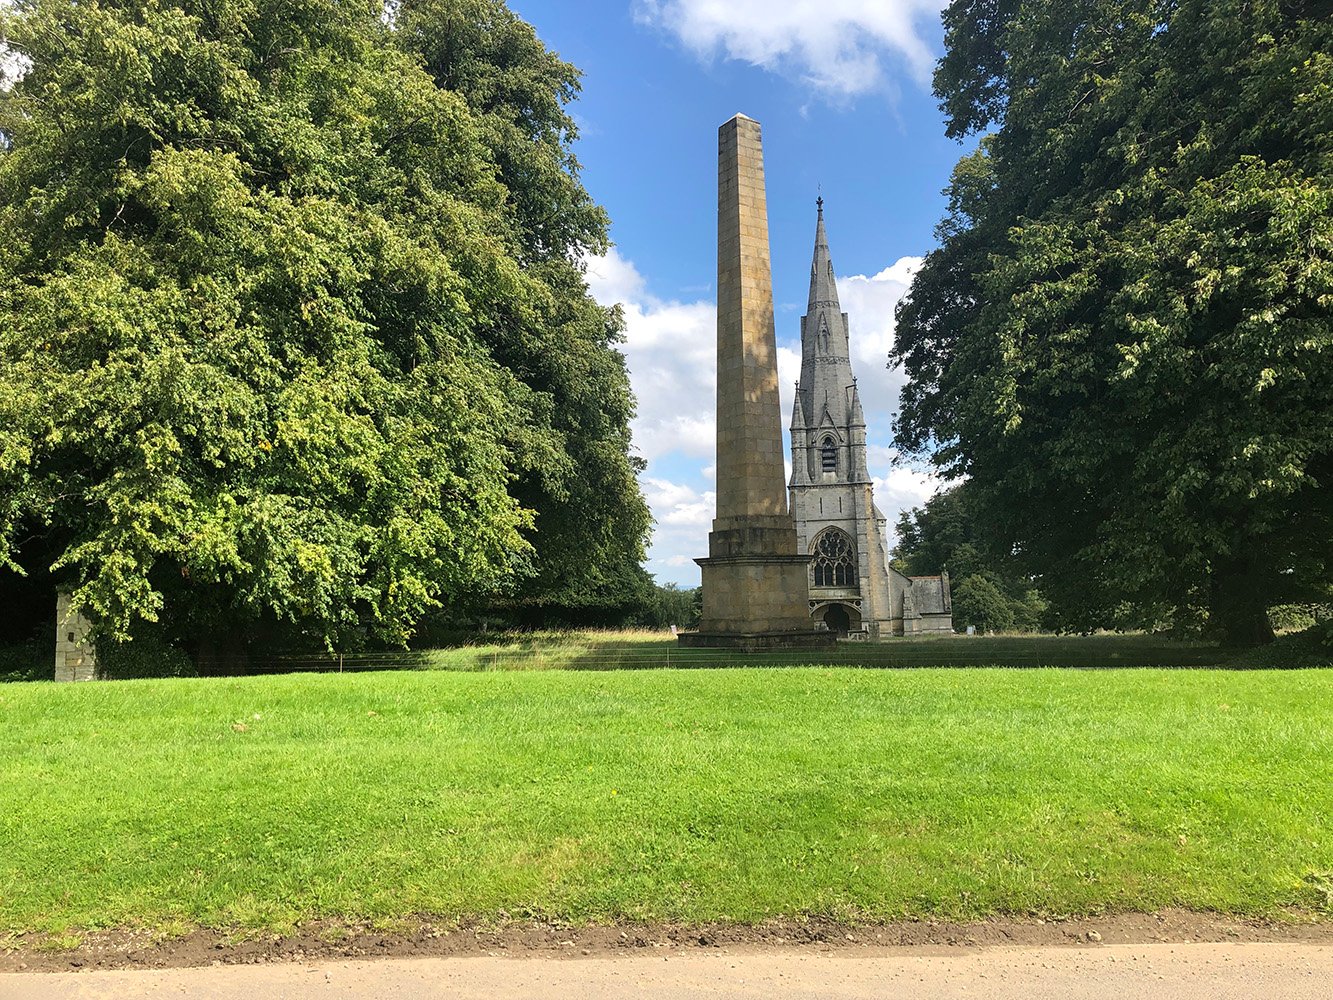 Image name obelisk and church studley royal fountains abbey north yorkshire the 4 image from the post A look at the history of Studley Royal, North Yorkshire, with Dr Emma Wells in Yorkshire.com.